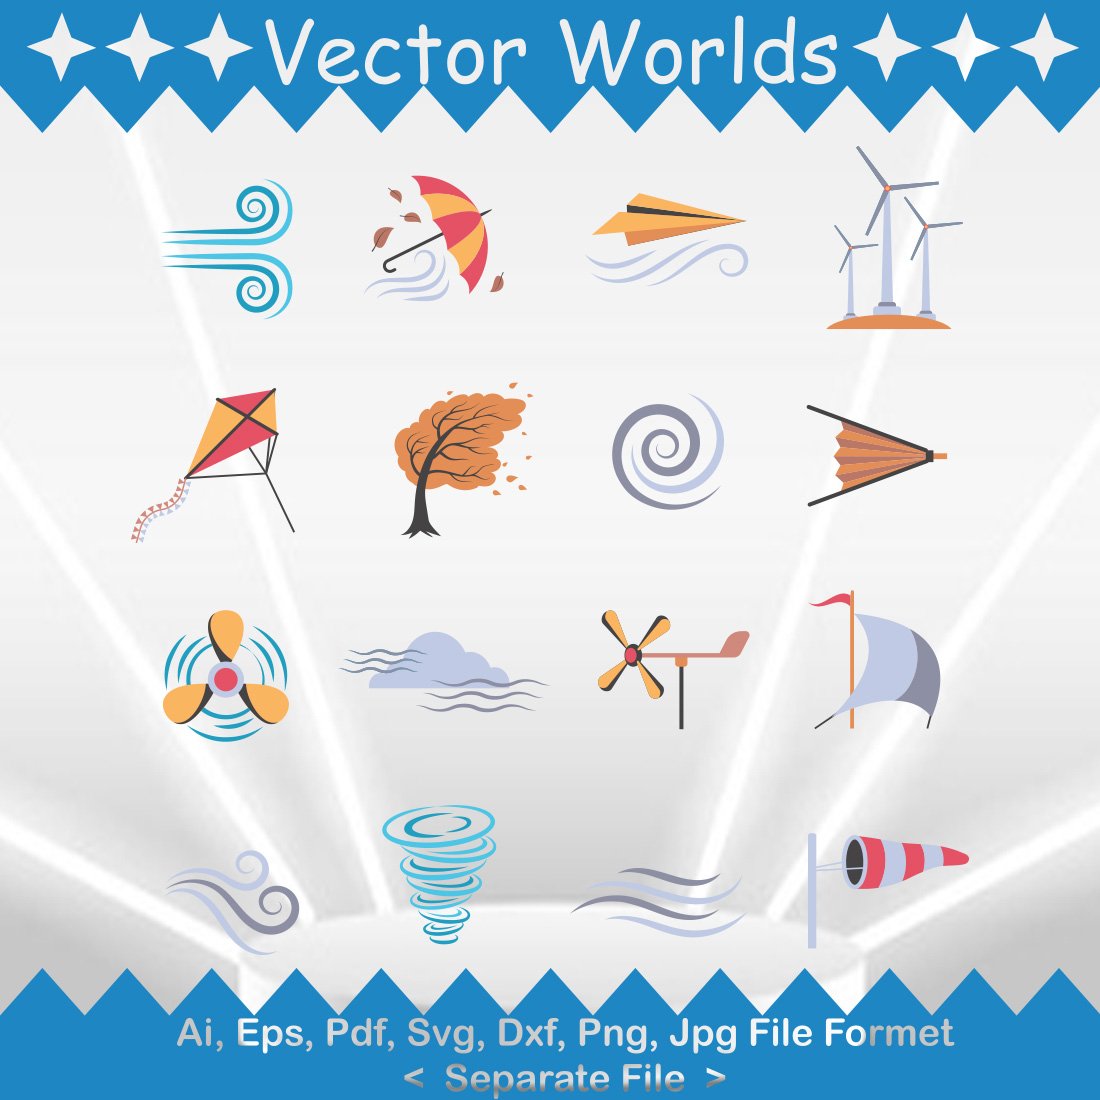 Weather SVG Vector Design cover image.